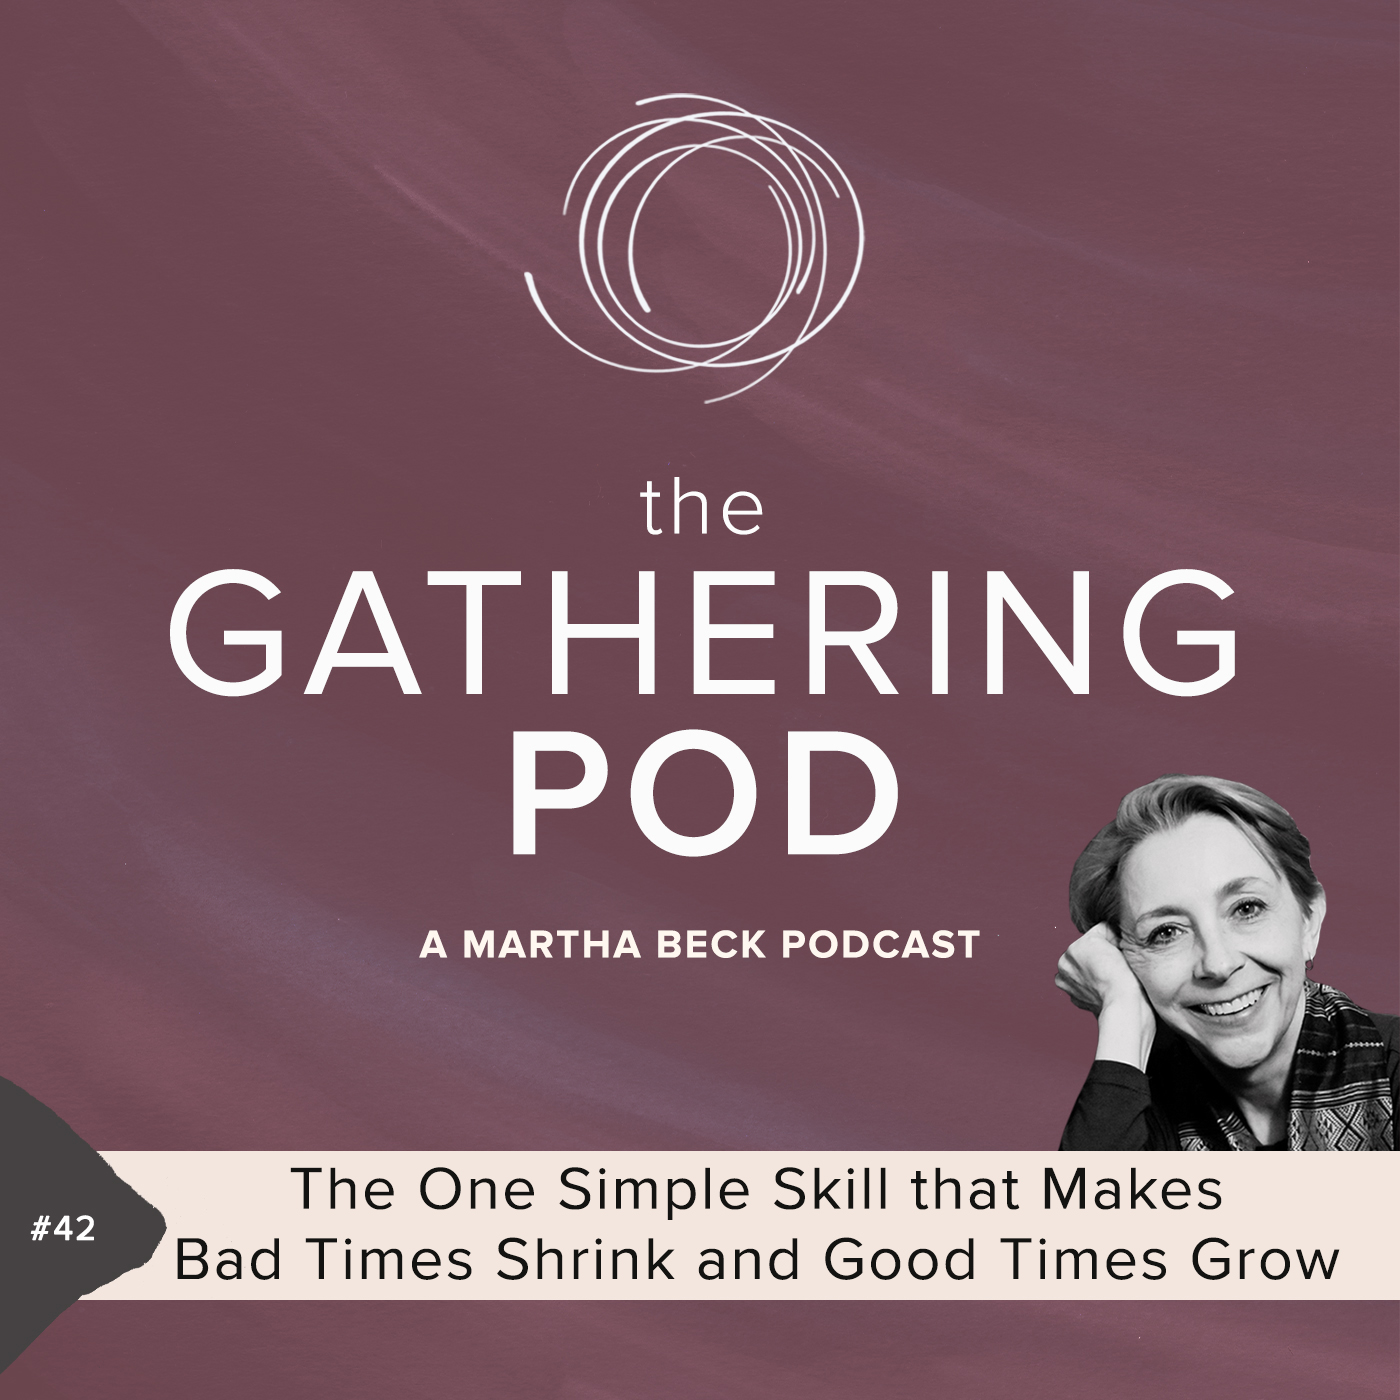 Image for The Gathering Pod A Martha Beck Podcast Episode #42 The One Simple Skill that Makes Bad Times Shrink and Good Times Grow